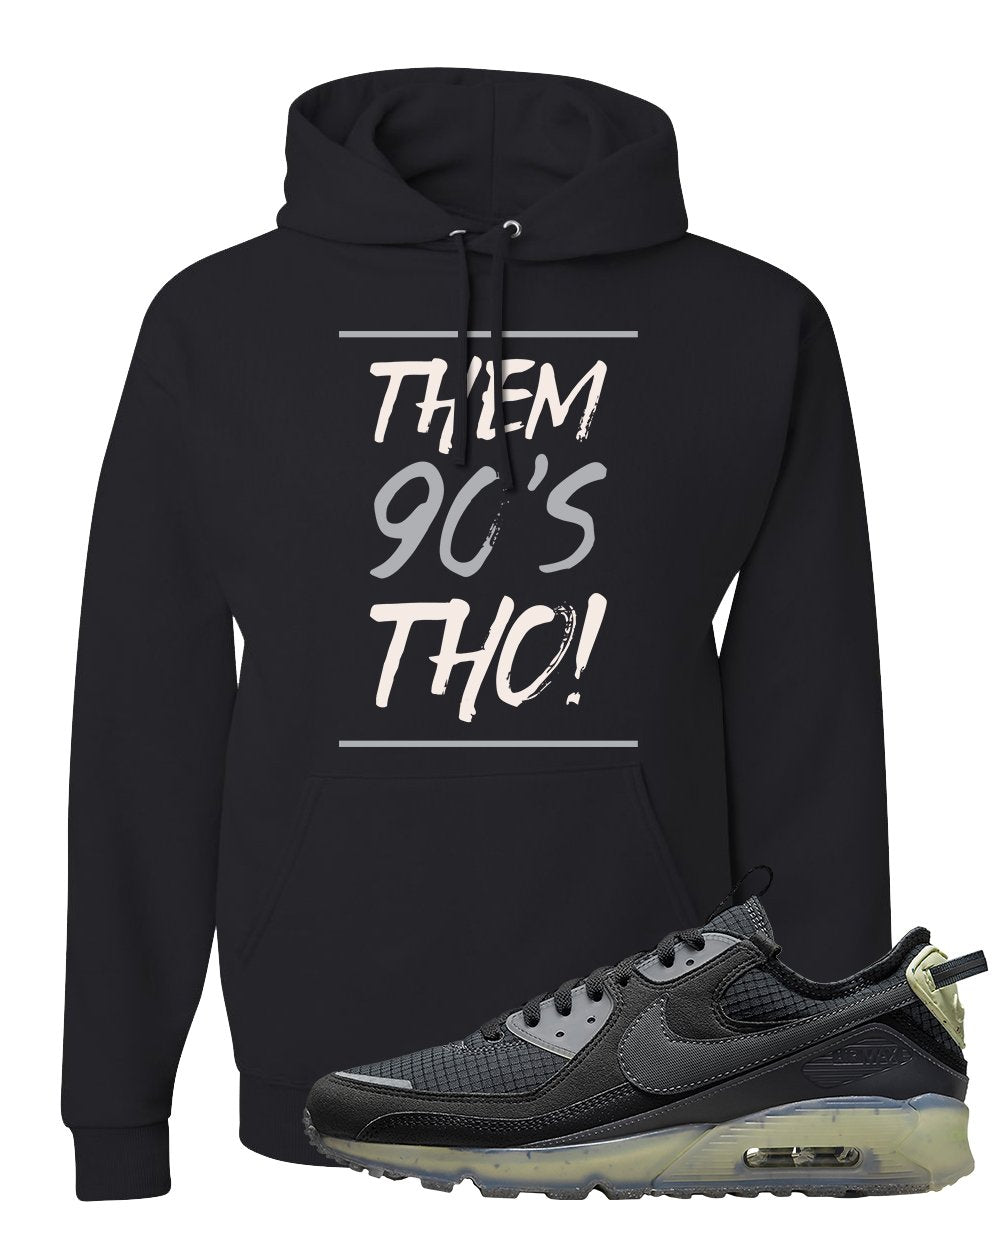 Terrascape Lime Ice 90s Hoodie | Them 90's Tho, Black